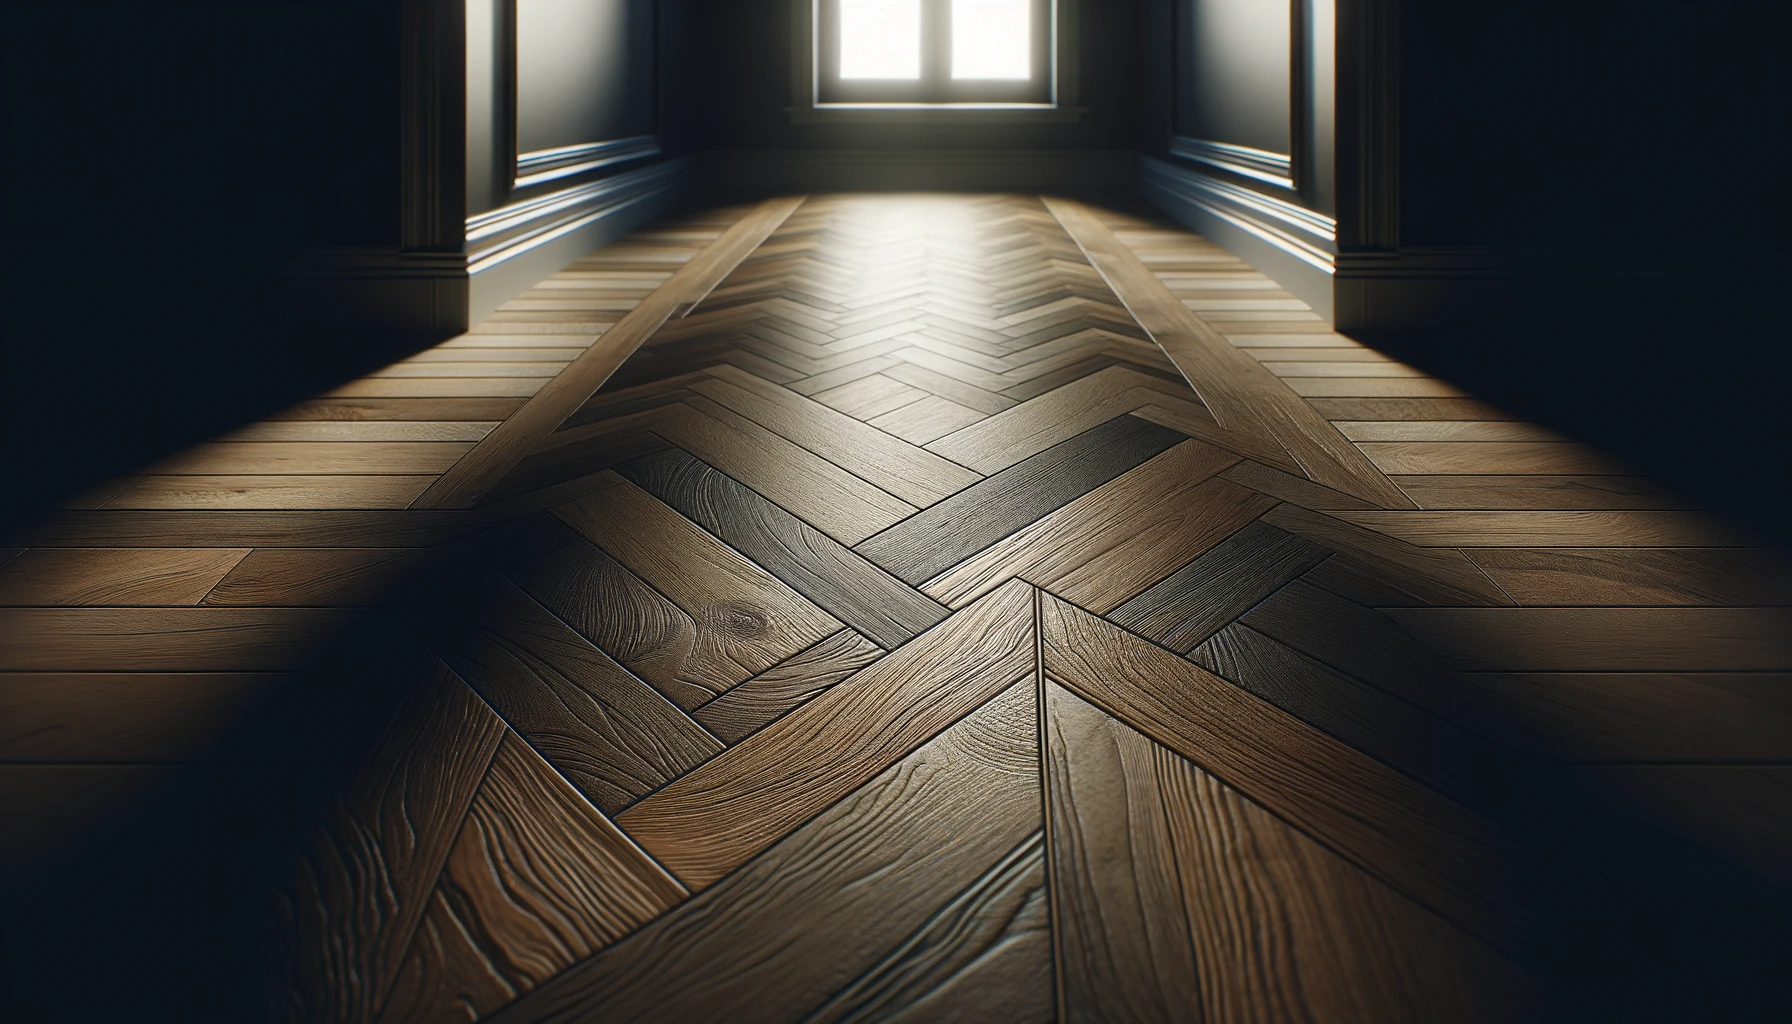 DALL·E 2023 11 18 06.17.25 An illustration of a homes floor with a dark overlay focusing solely on the floor. The image shows detailed wooden flooring with a rich texture and